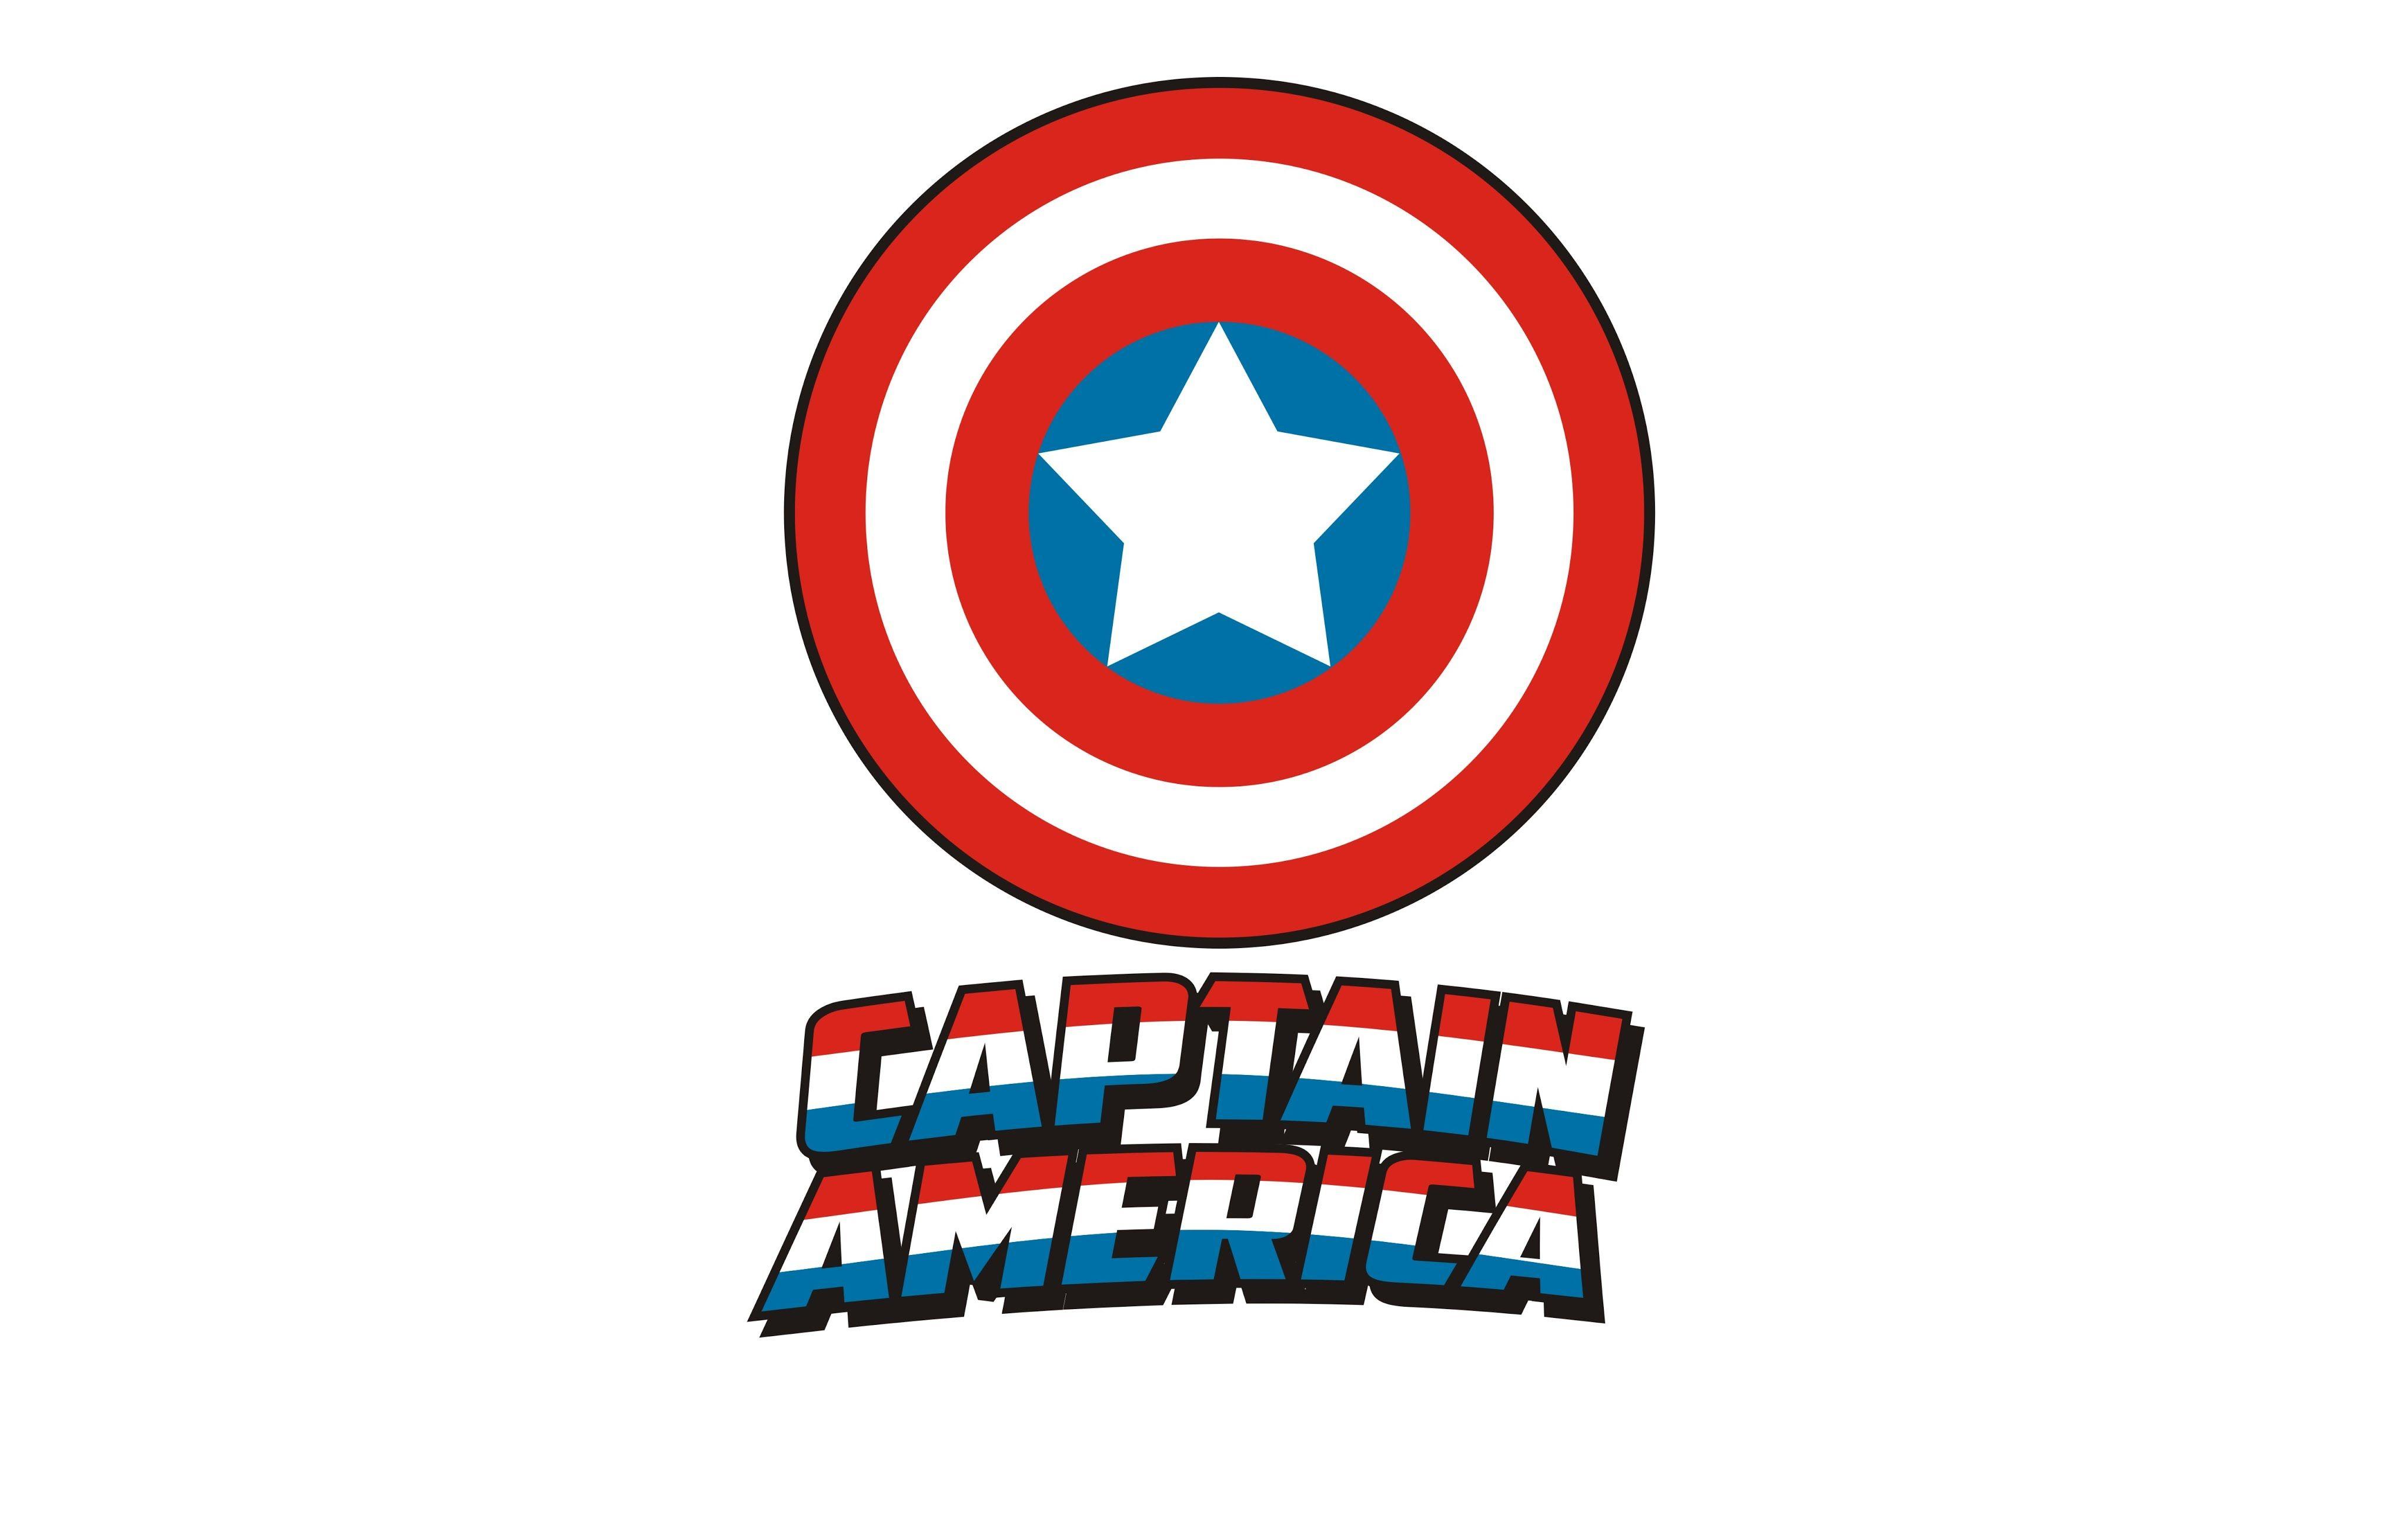 Captain America Logo - Captain America logo free online Puzzle Games on bobandsuewilliams